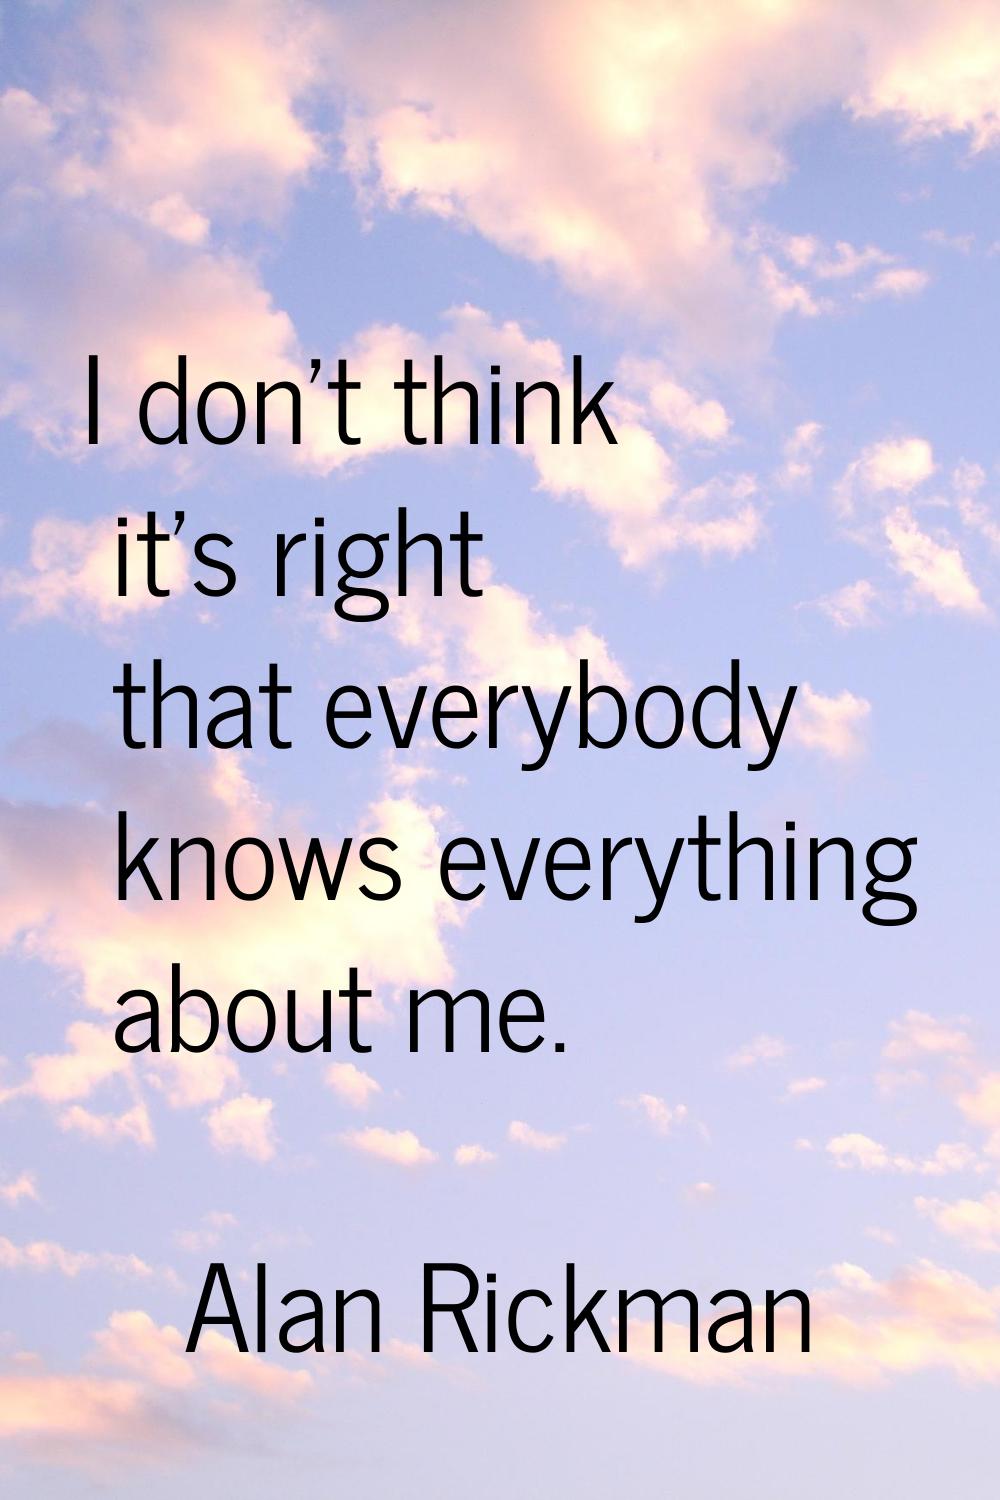 I don't think it's right that everybody knows everything about me.